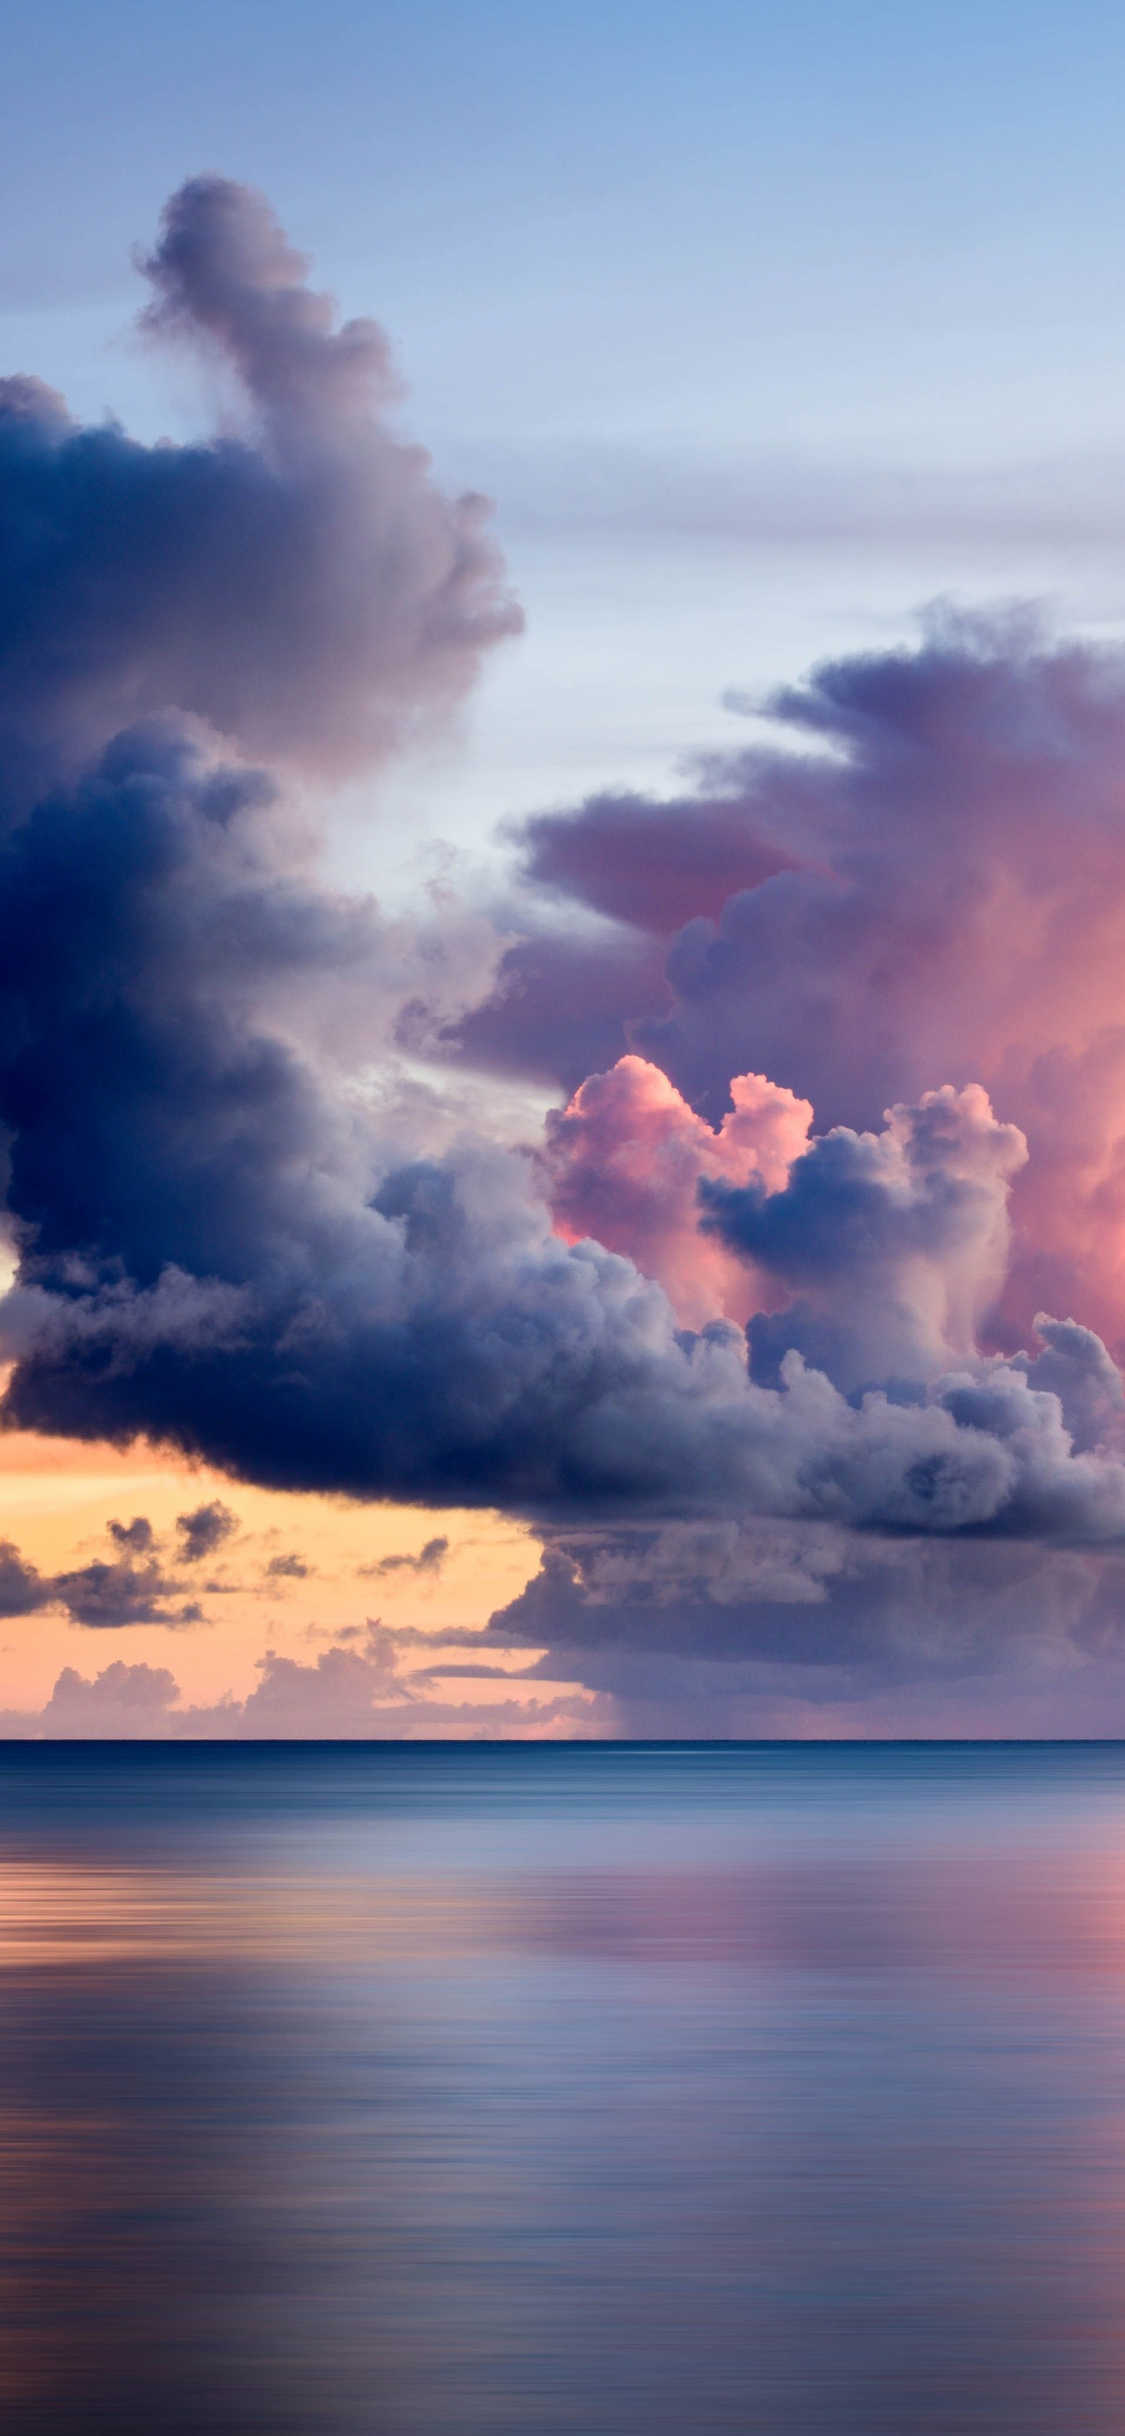 Download wallpaper 1125x2436 nature, clouds over the sea, body of water ...